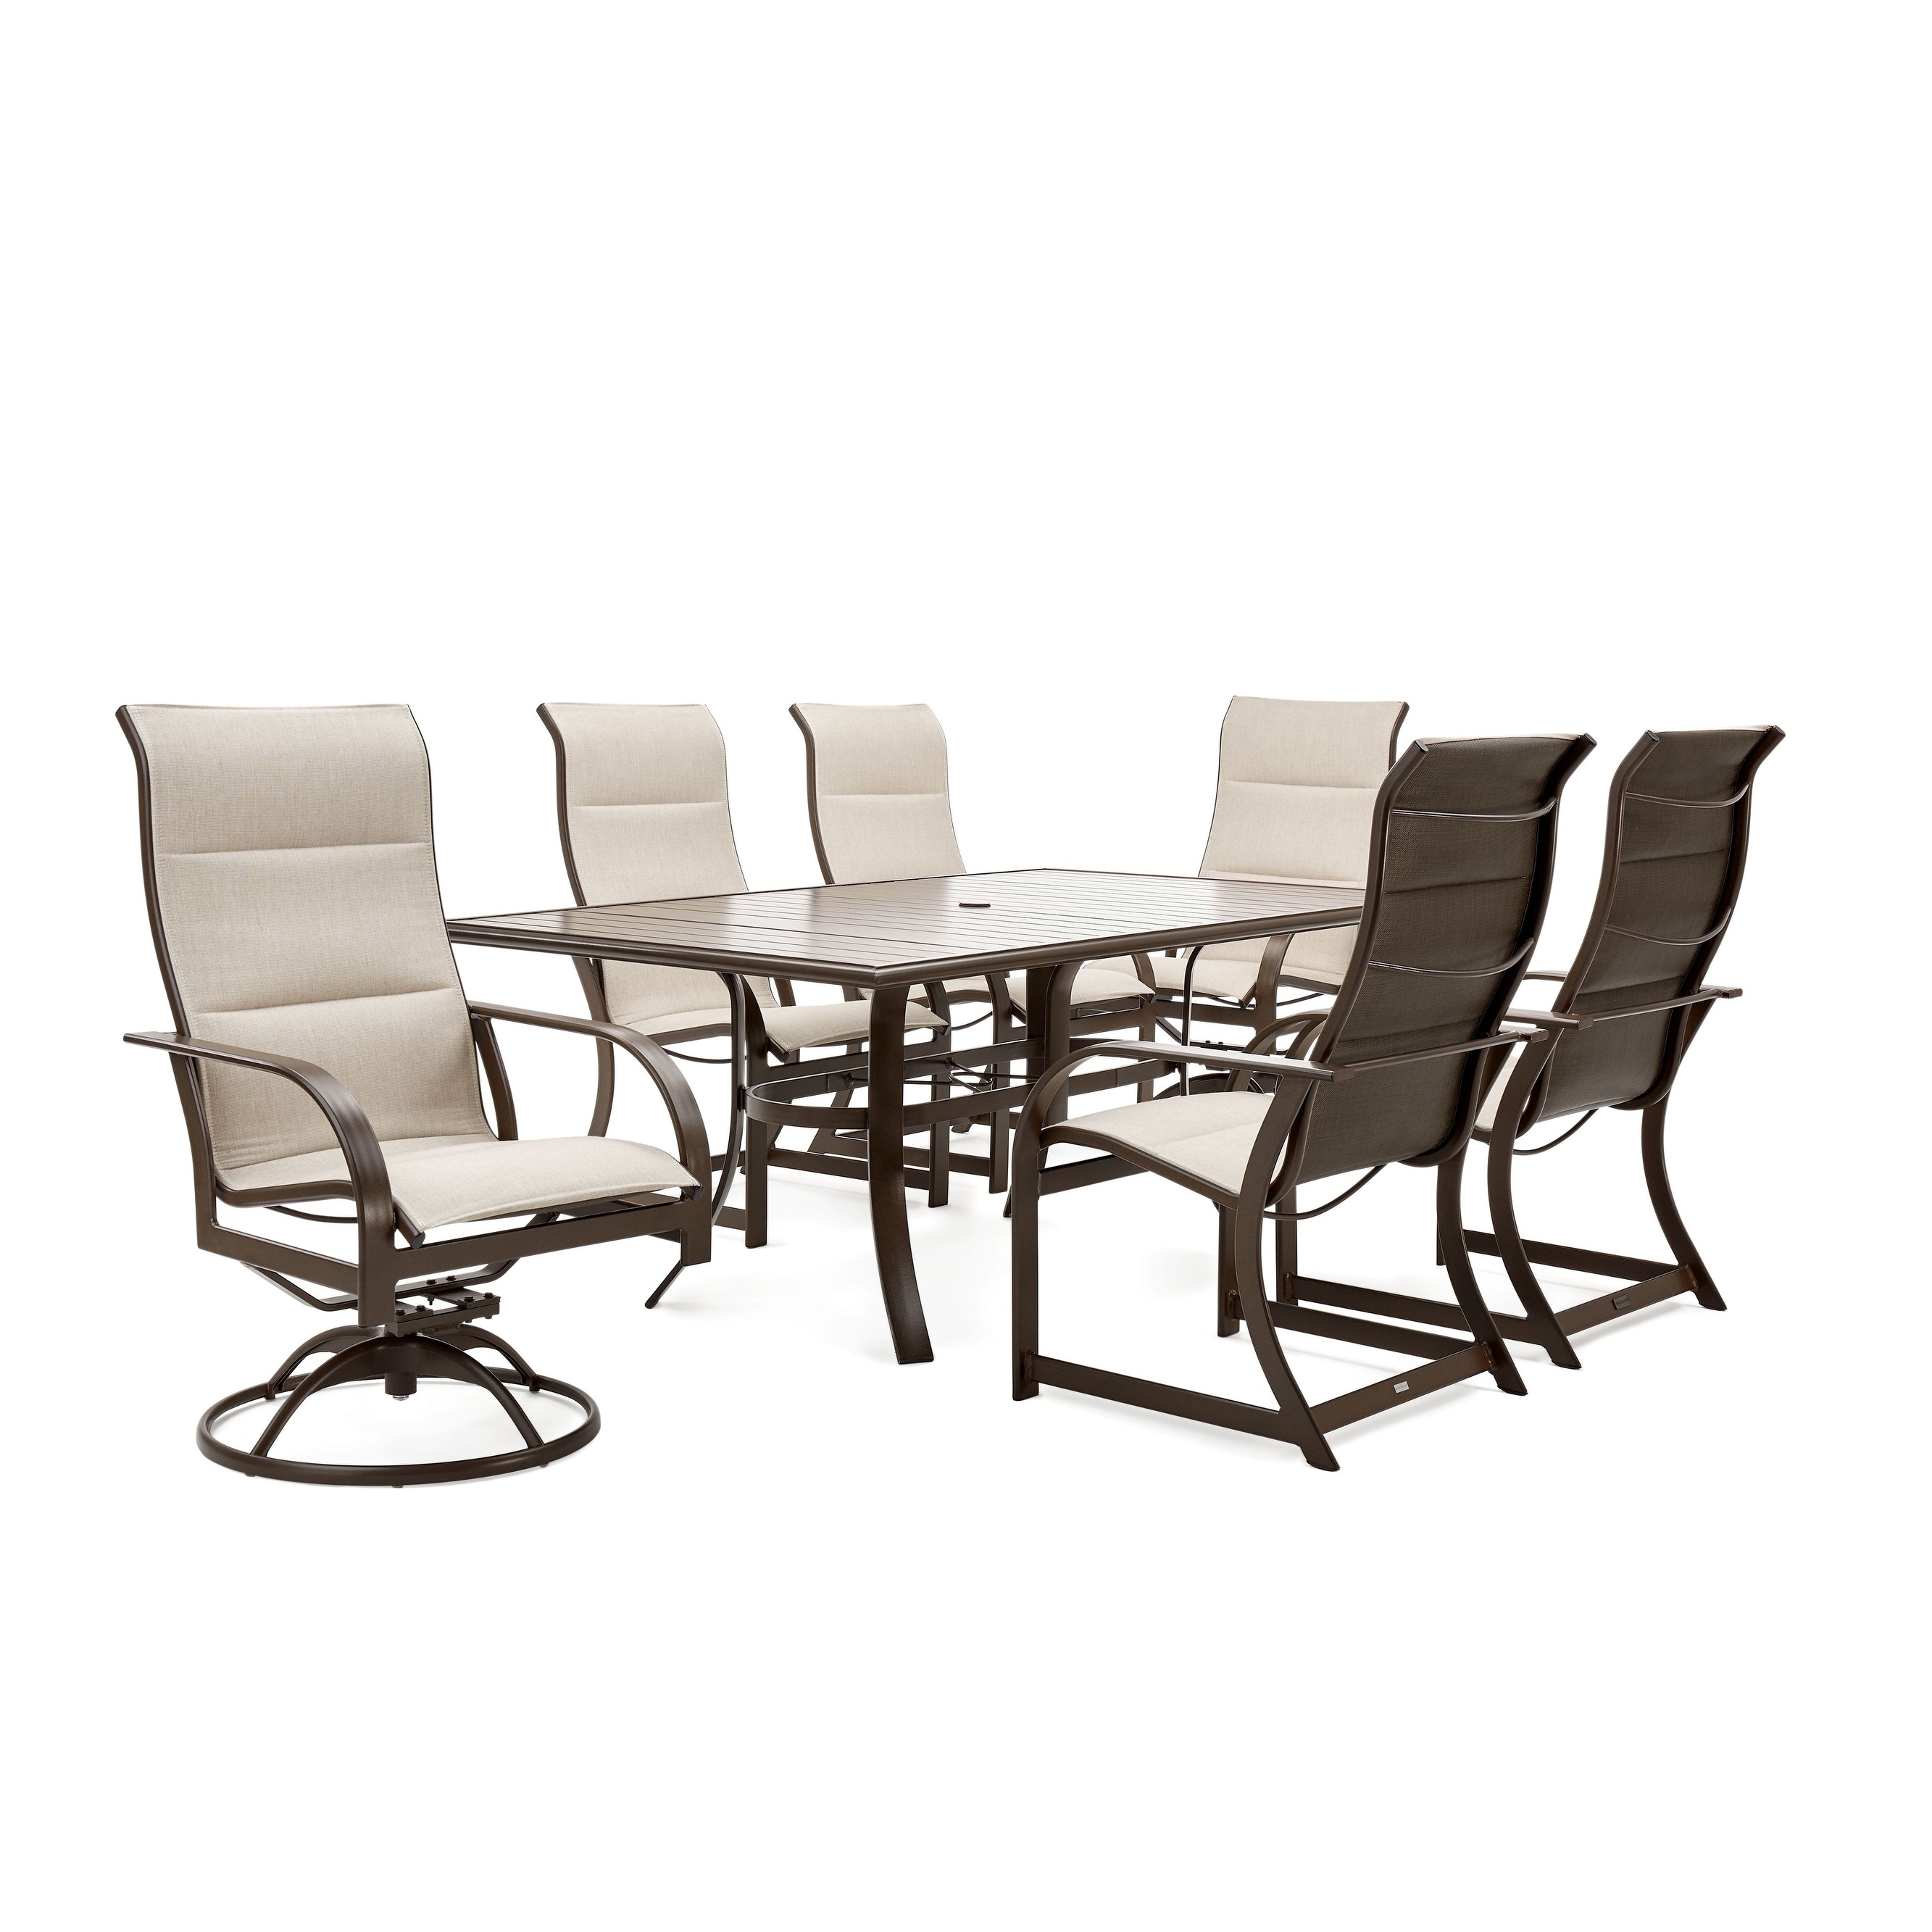 Key West Sunbrella Padded Sling 7 Piece Dining Set With 2 Swivel Dining Chairs  4 Dining Chairs  And Rectangular Dining Table